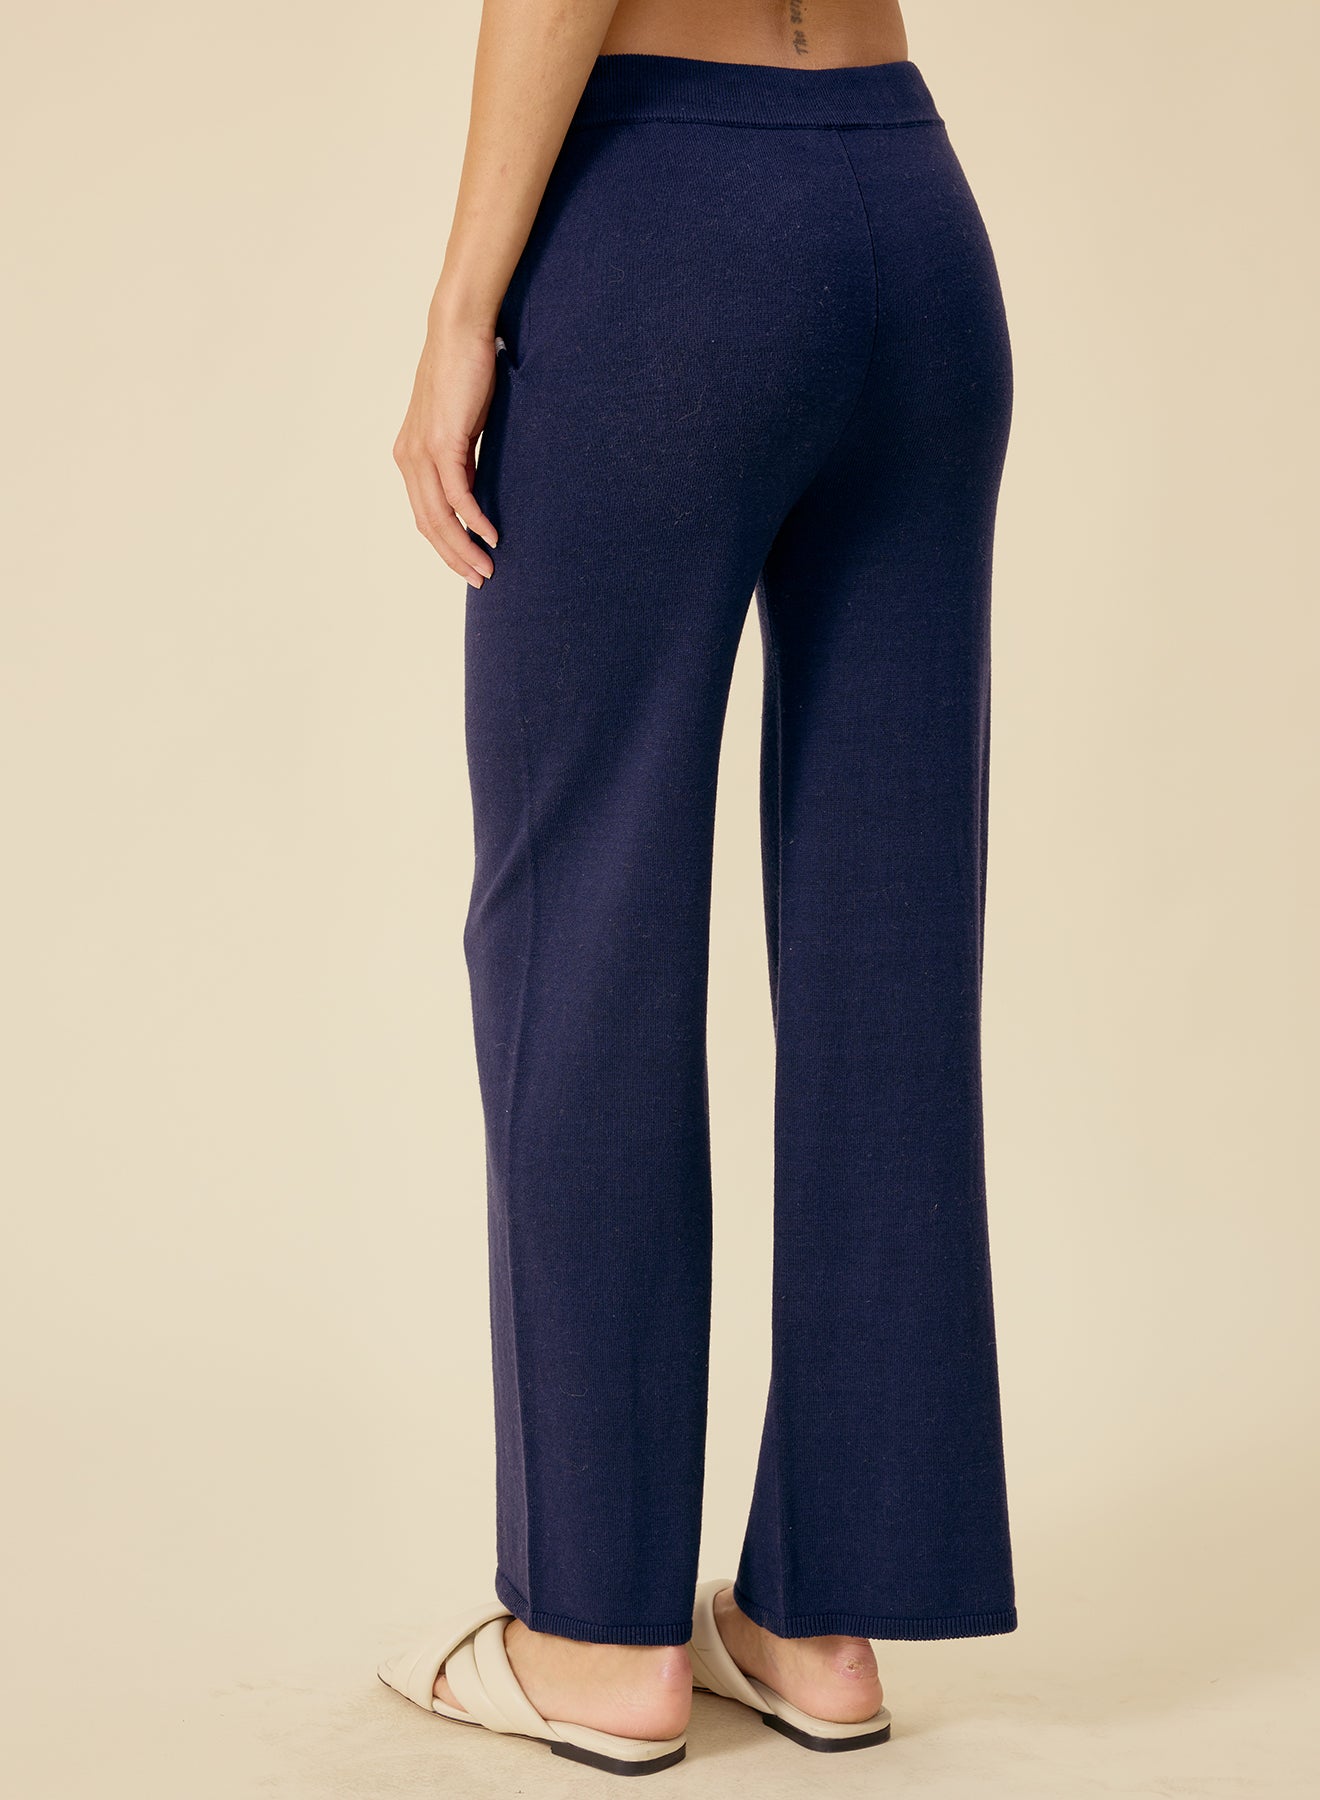 BIANCA CROPPED PANT IN NAVY - Romi Boutique